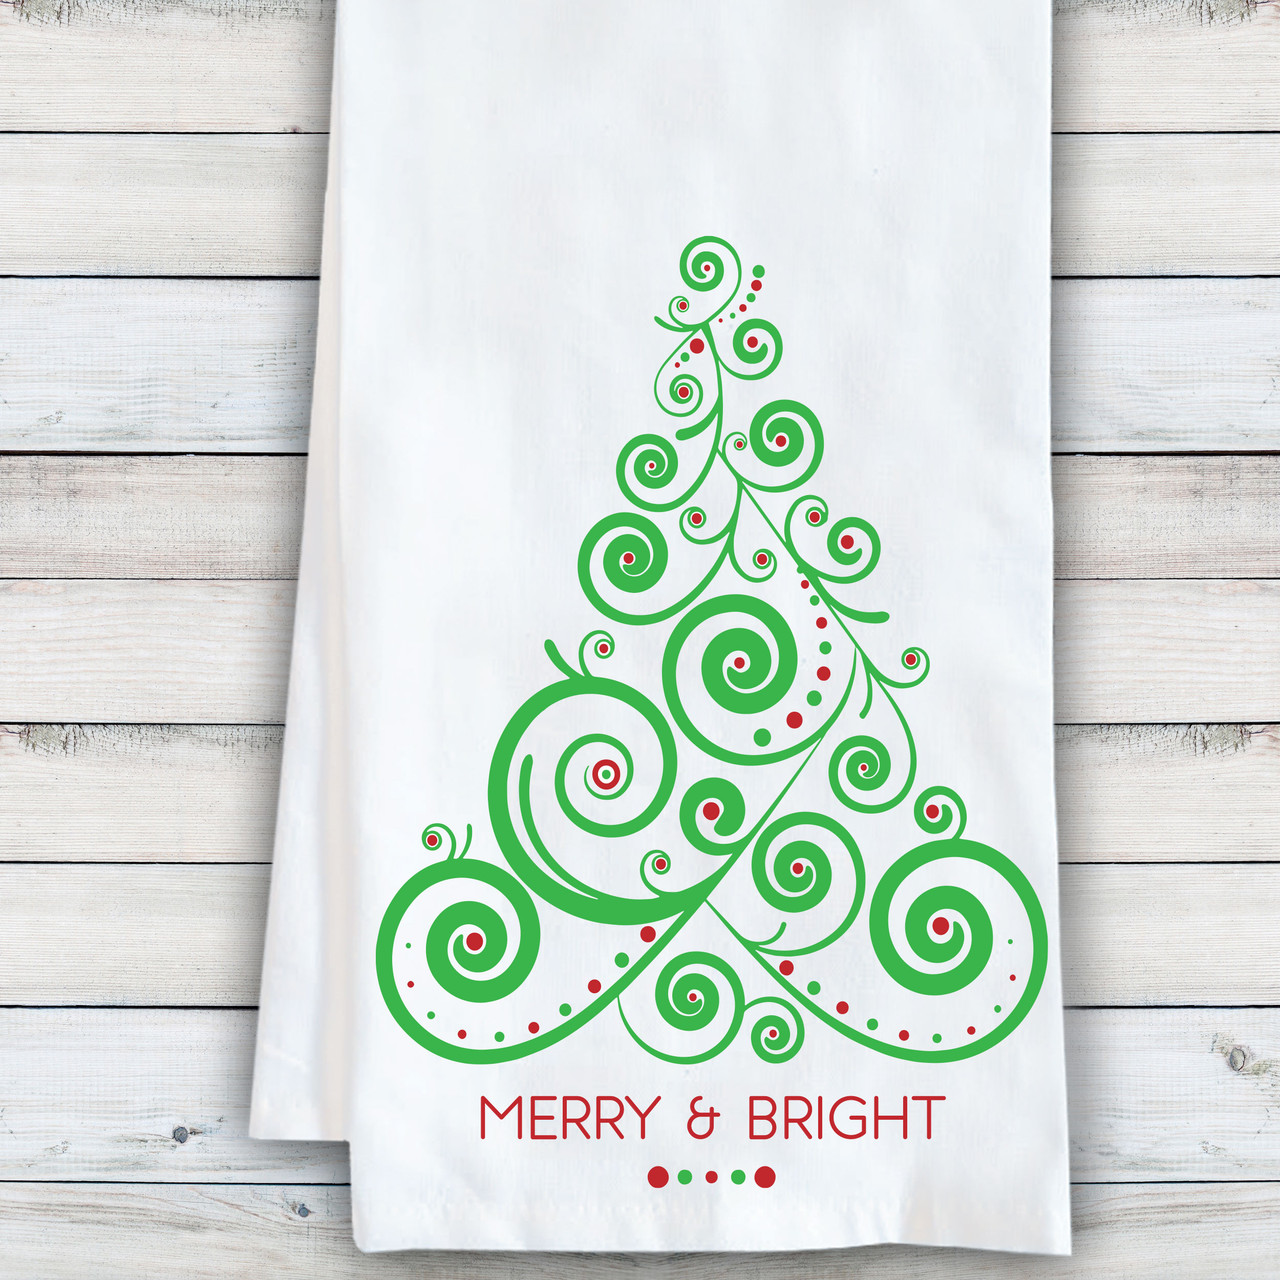 https://cdn11.bigcommerce.com/s-5grzuu6/images/stencil/1280x1280/products/4741/55045/Boho-Christmas-Tree-Personalized-Kitchen-Towel-__07541.1689696162.jpg?c=2